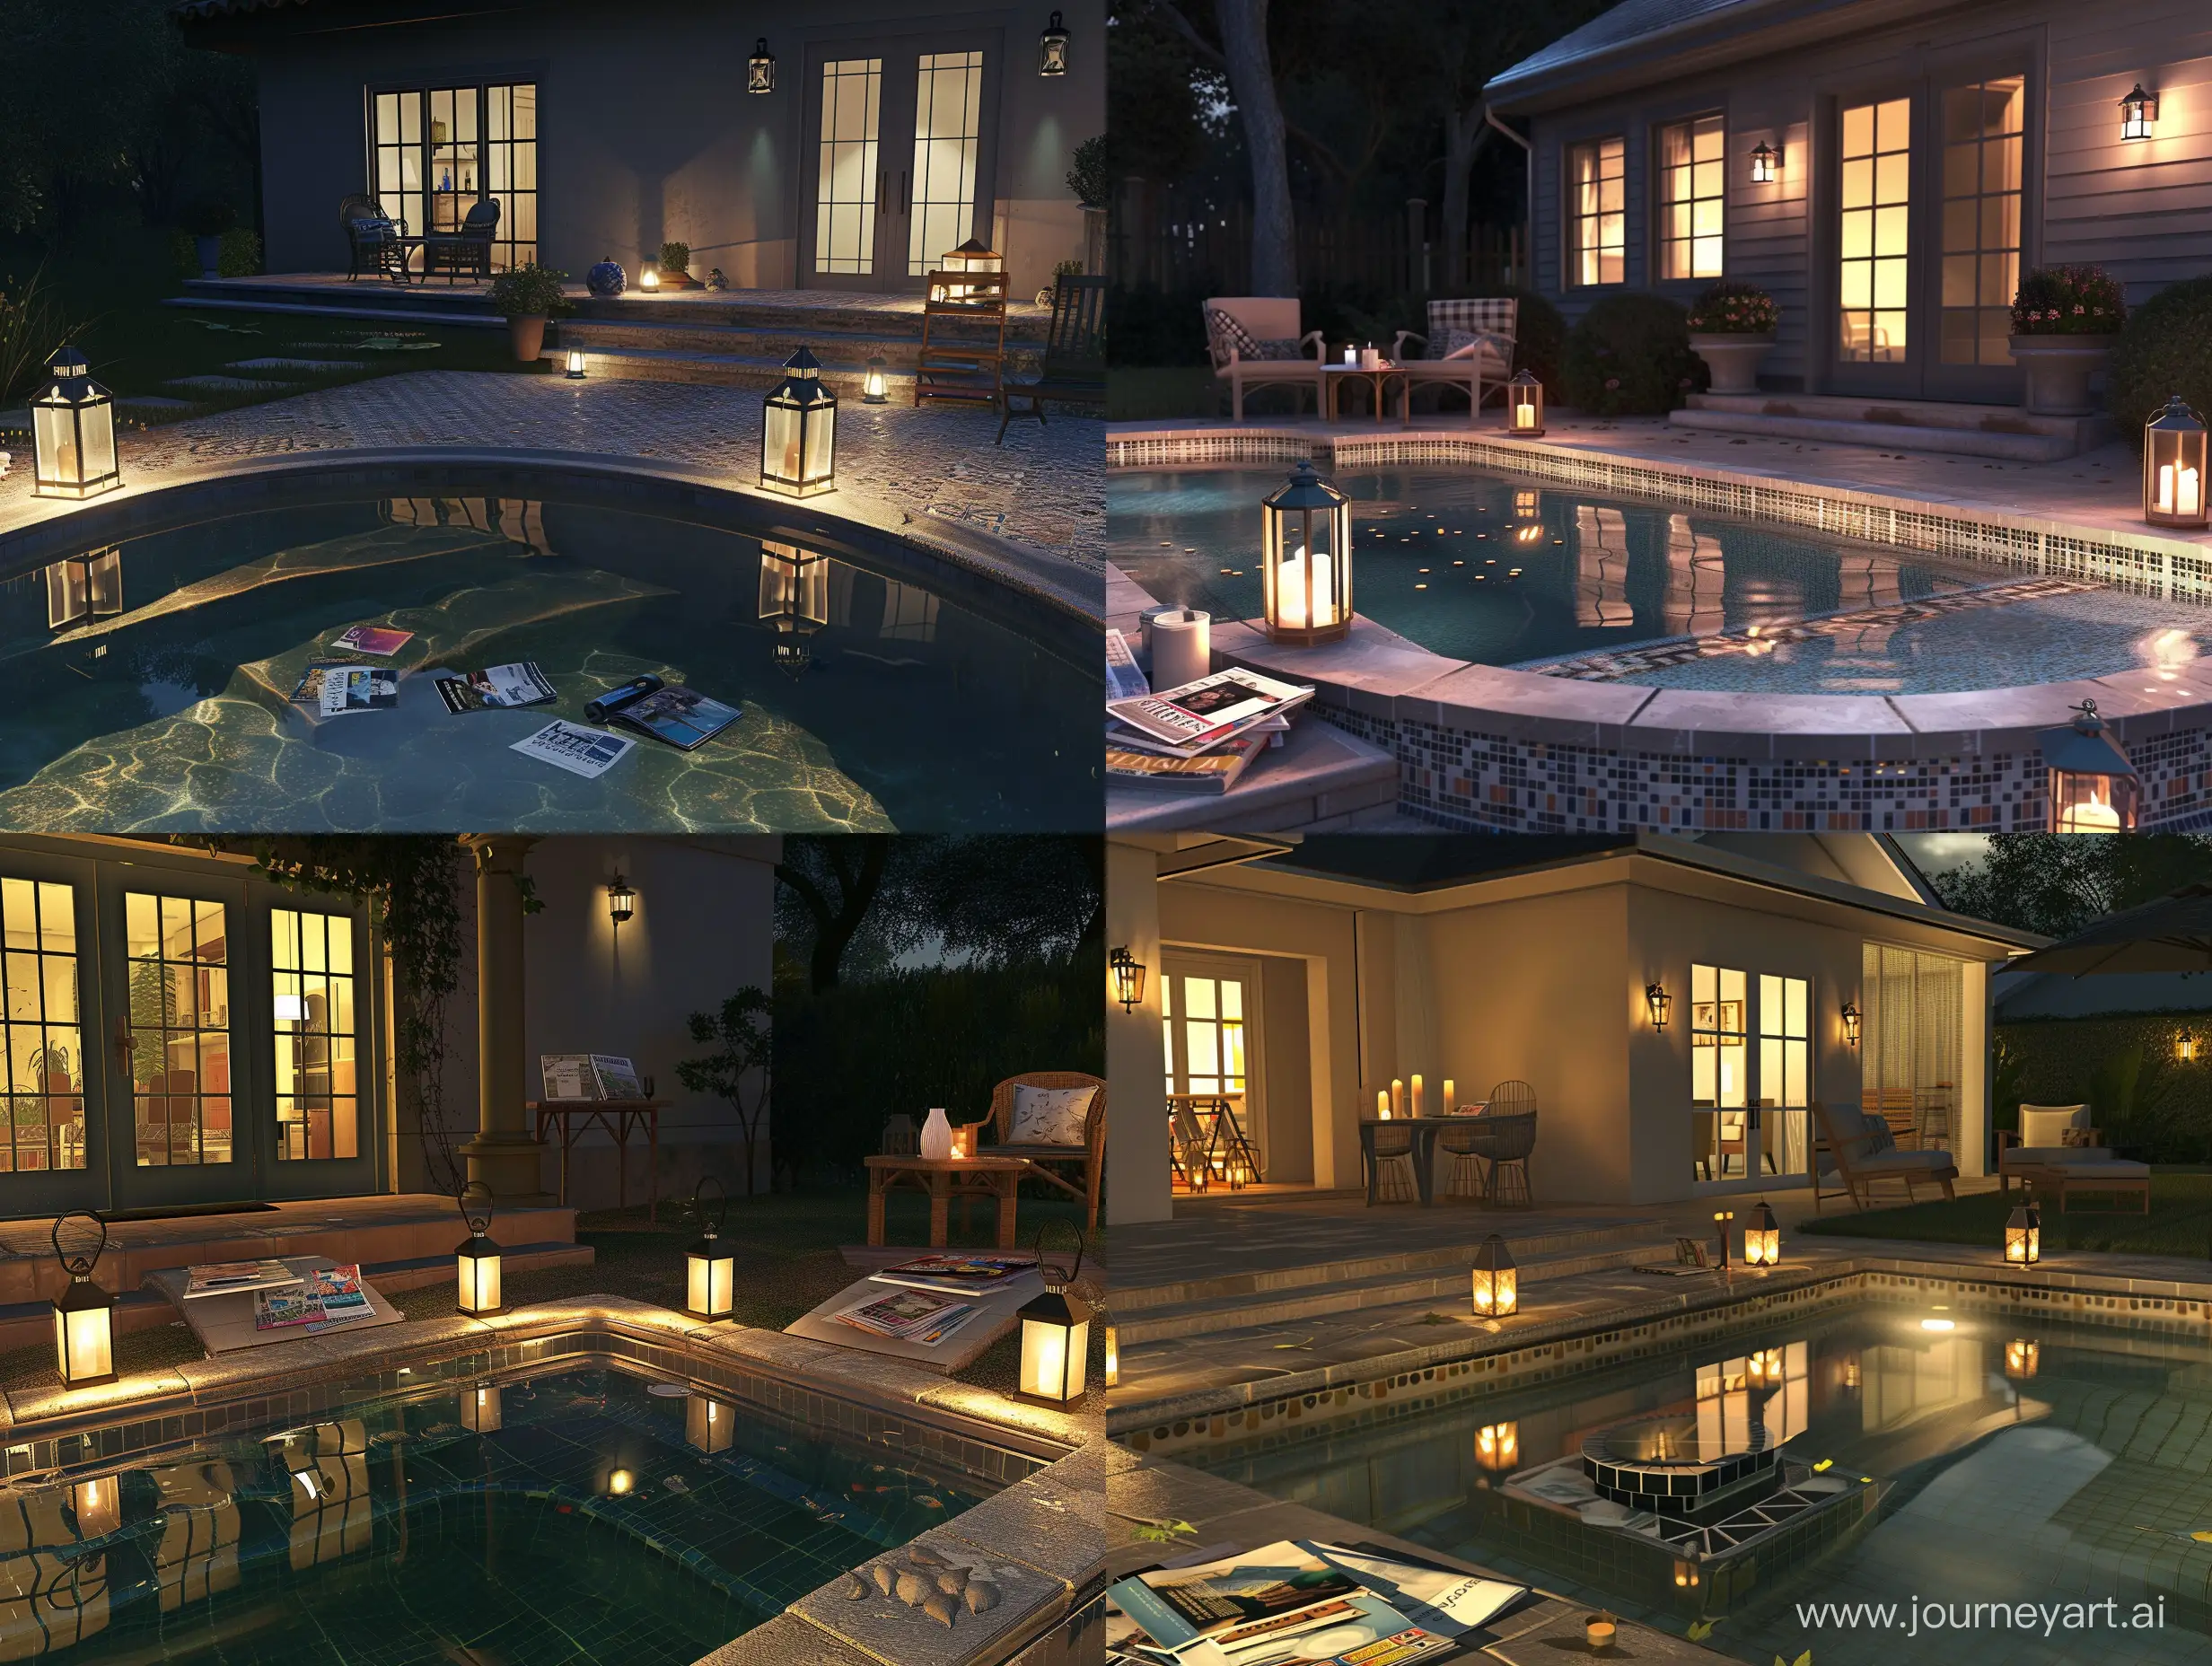 beautiful american style house at night. a backyard a small swimming pool, with edging and small tiled steps. lanterns reflecting in the transparent water. near is a little table with magazines and candles. there are two chairs near the table. 8 to ultrarealism, unreal engine, clear objects, beautiful night skies 